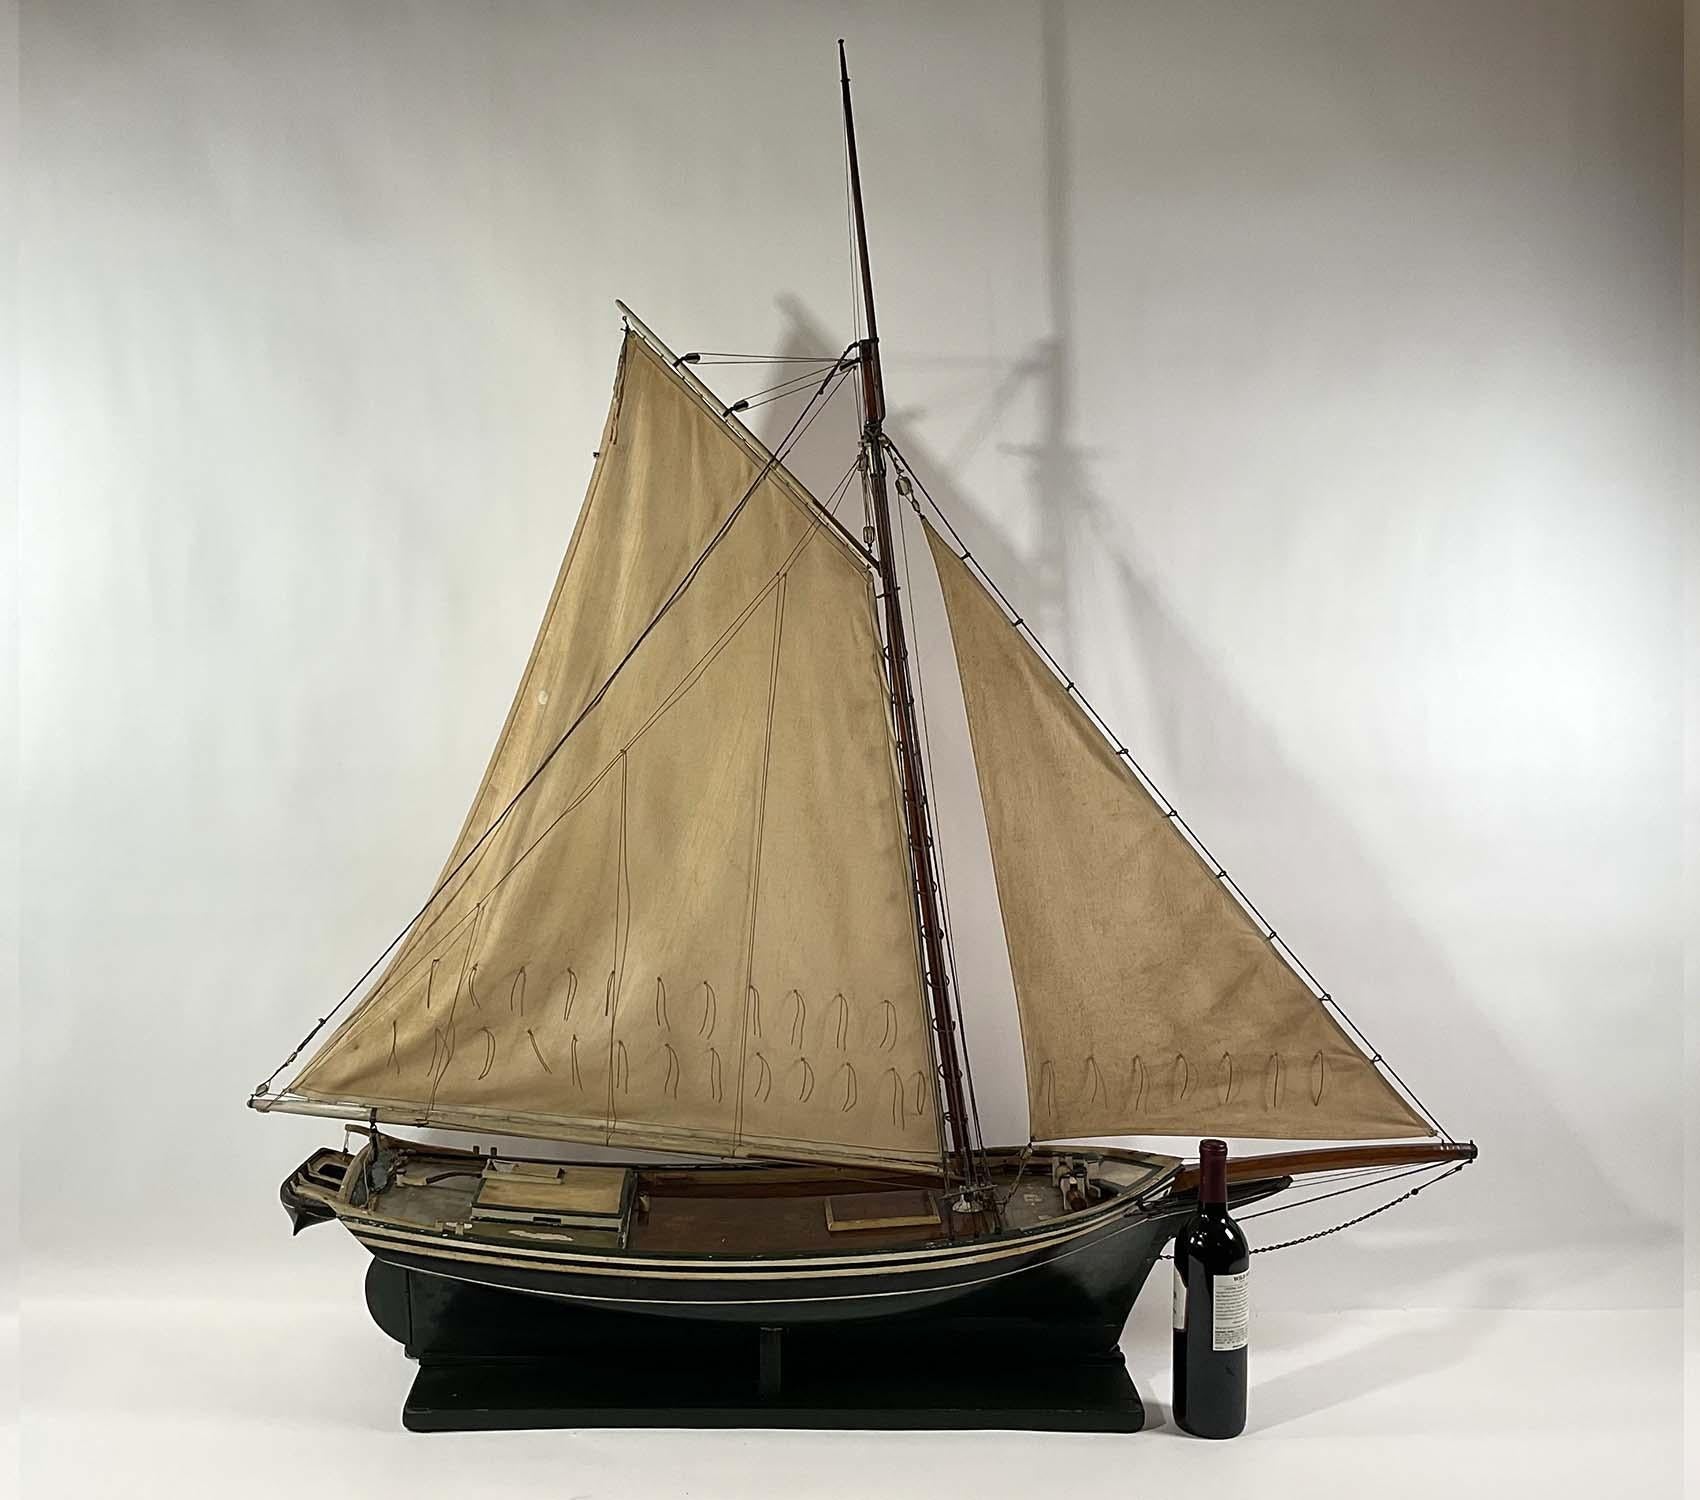 North American Model of the Oyster Sloop Fanny Fern of Quincy Mass